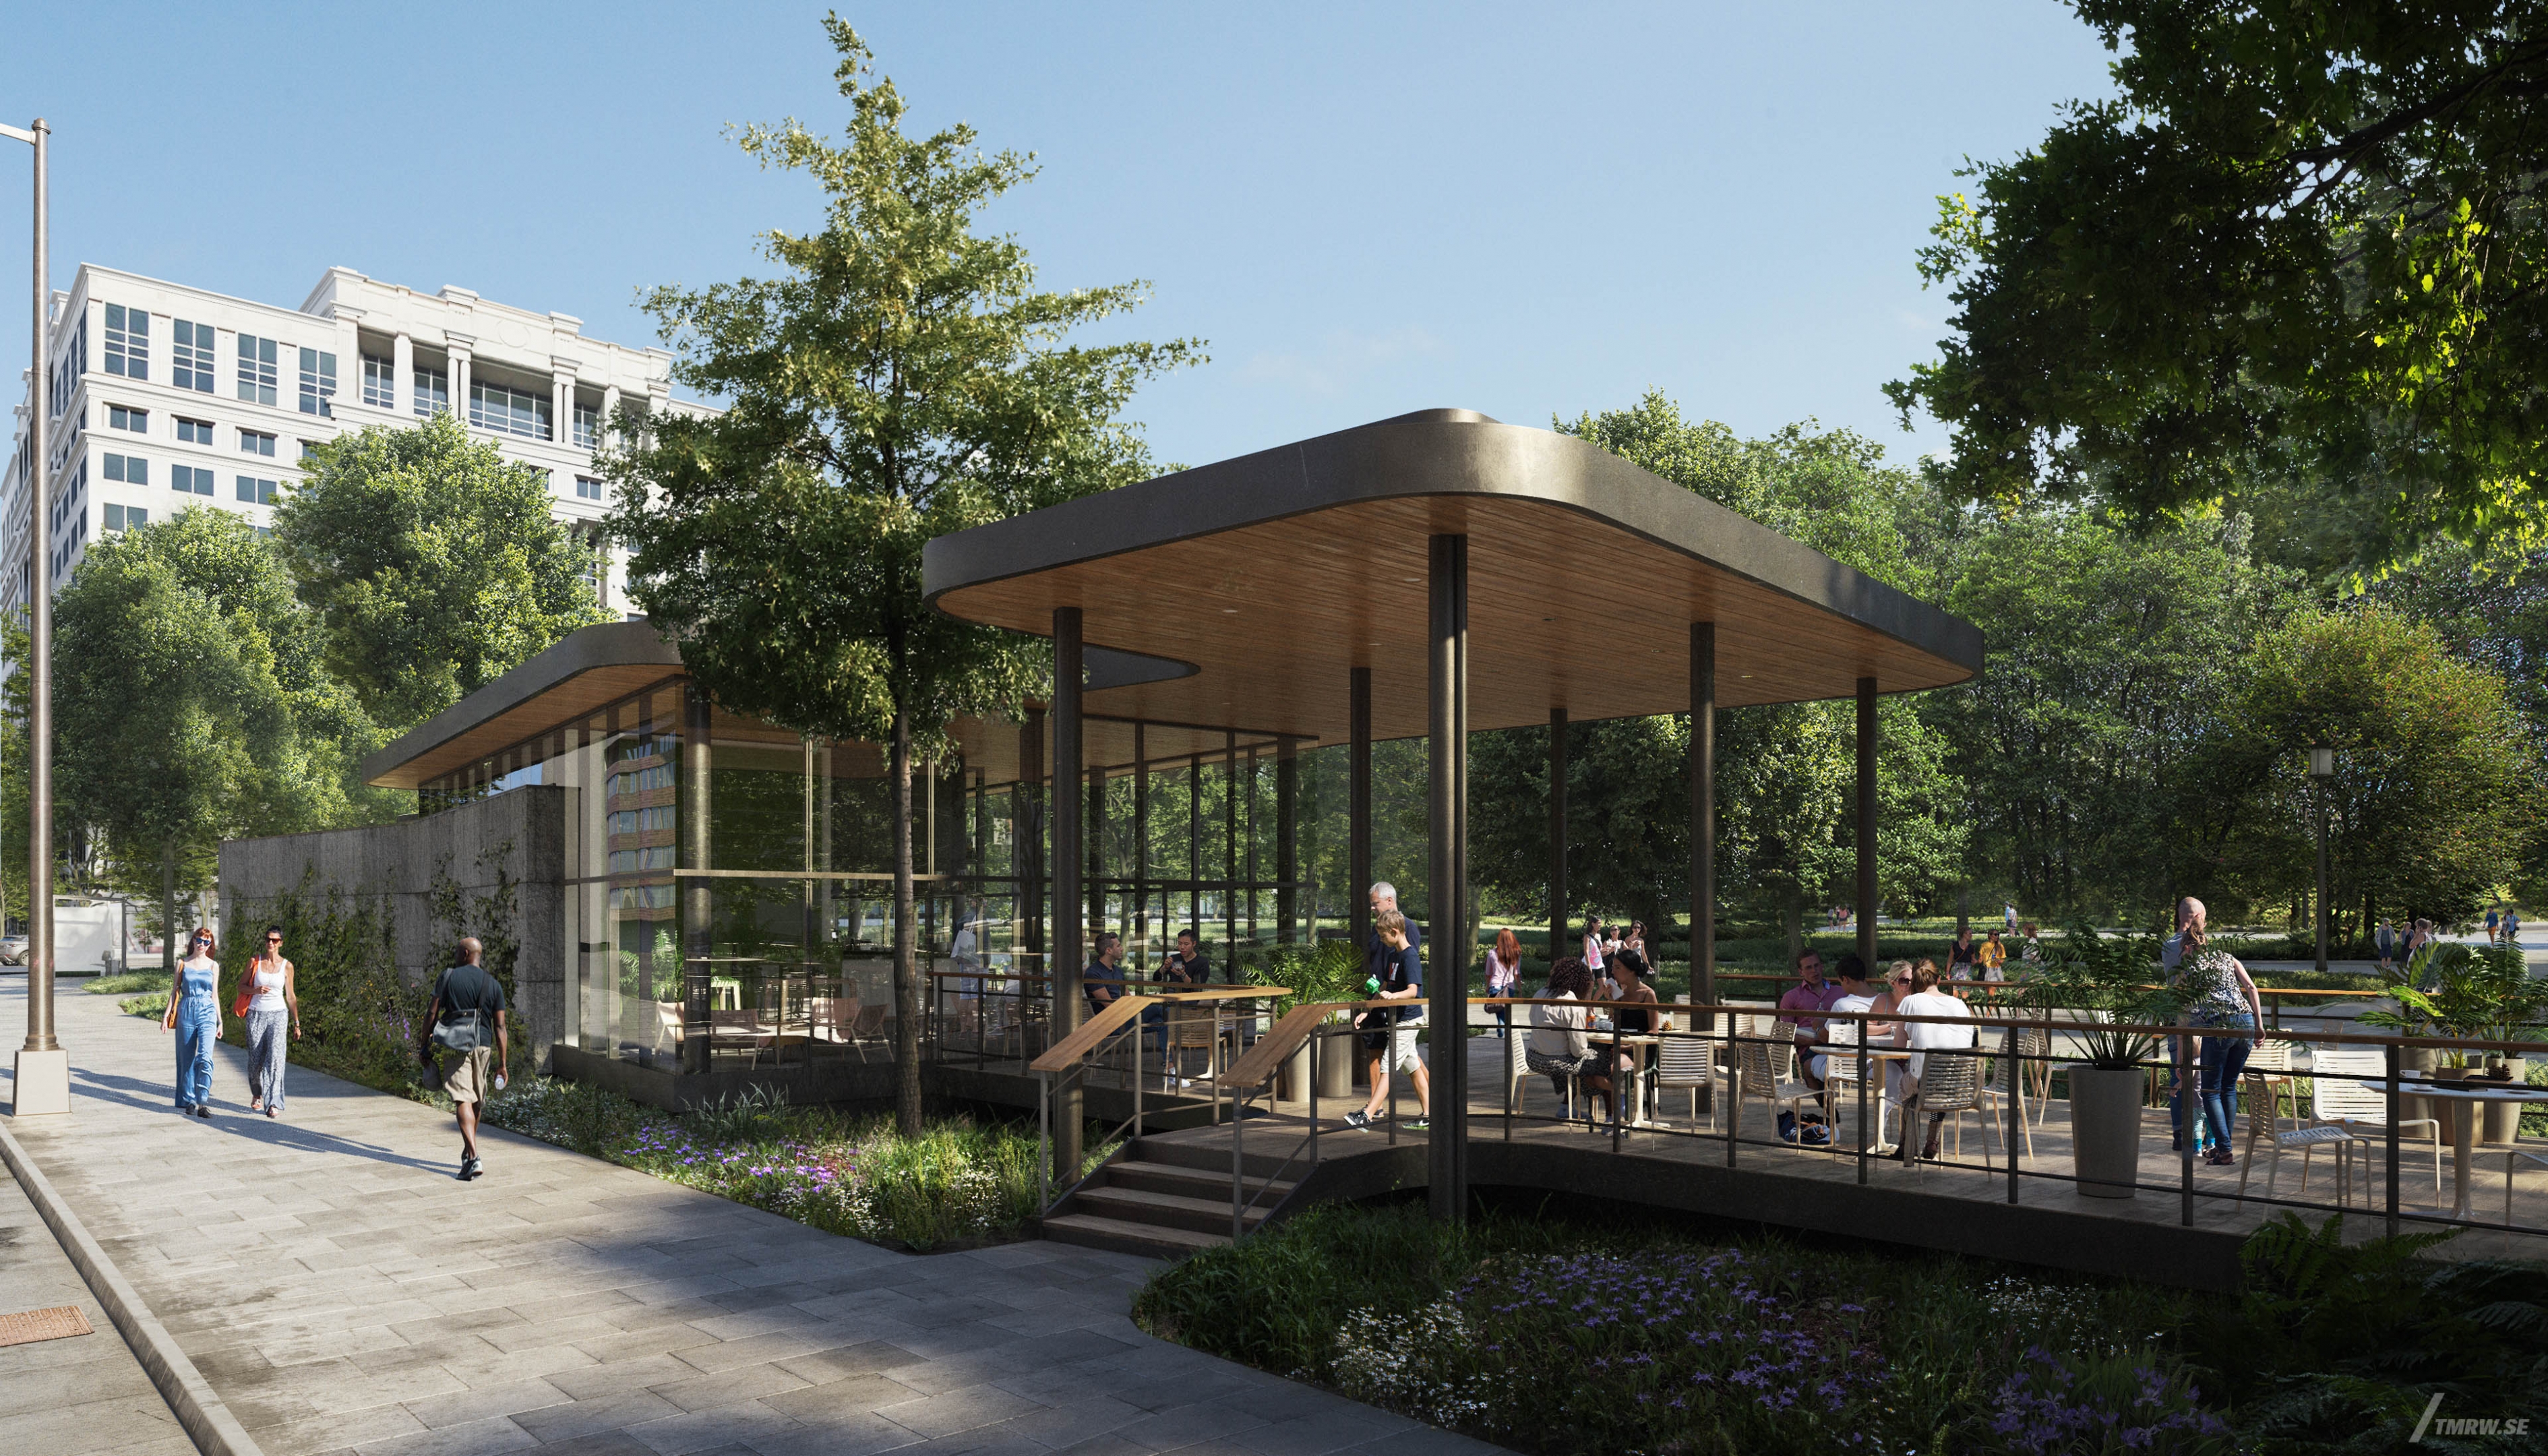 Architectural visualization of Franklin Park for Studios, exterior of a park in day light, street and a café